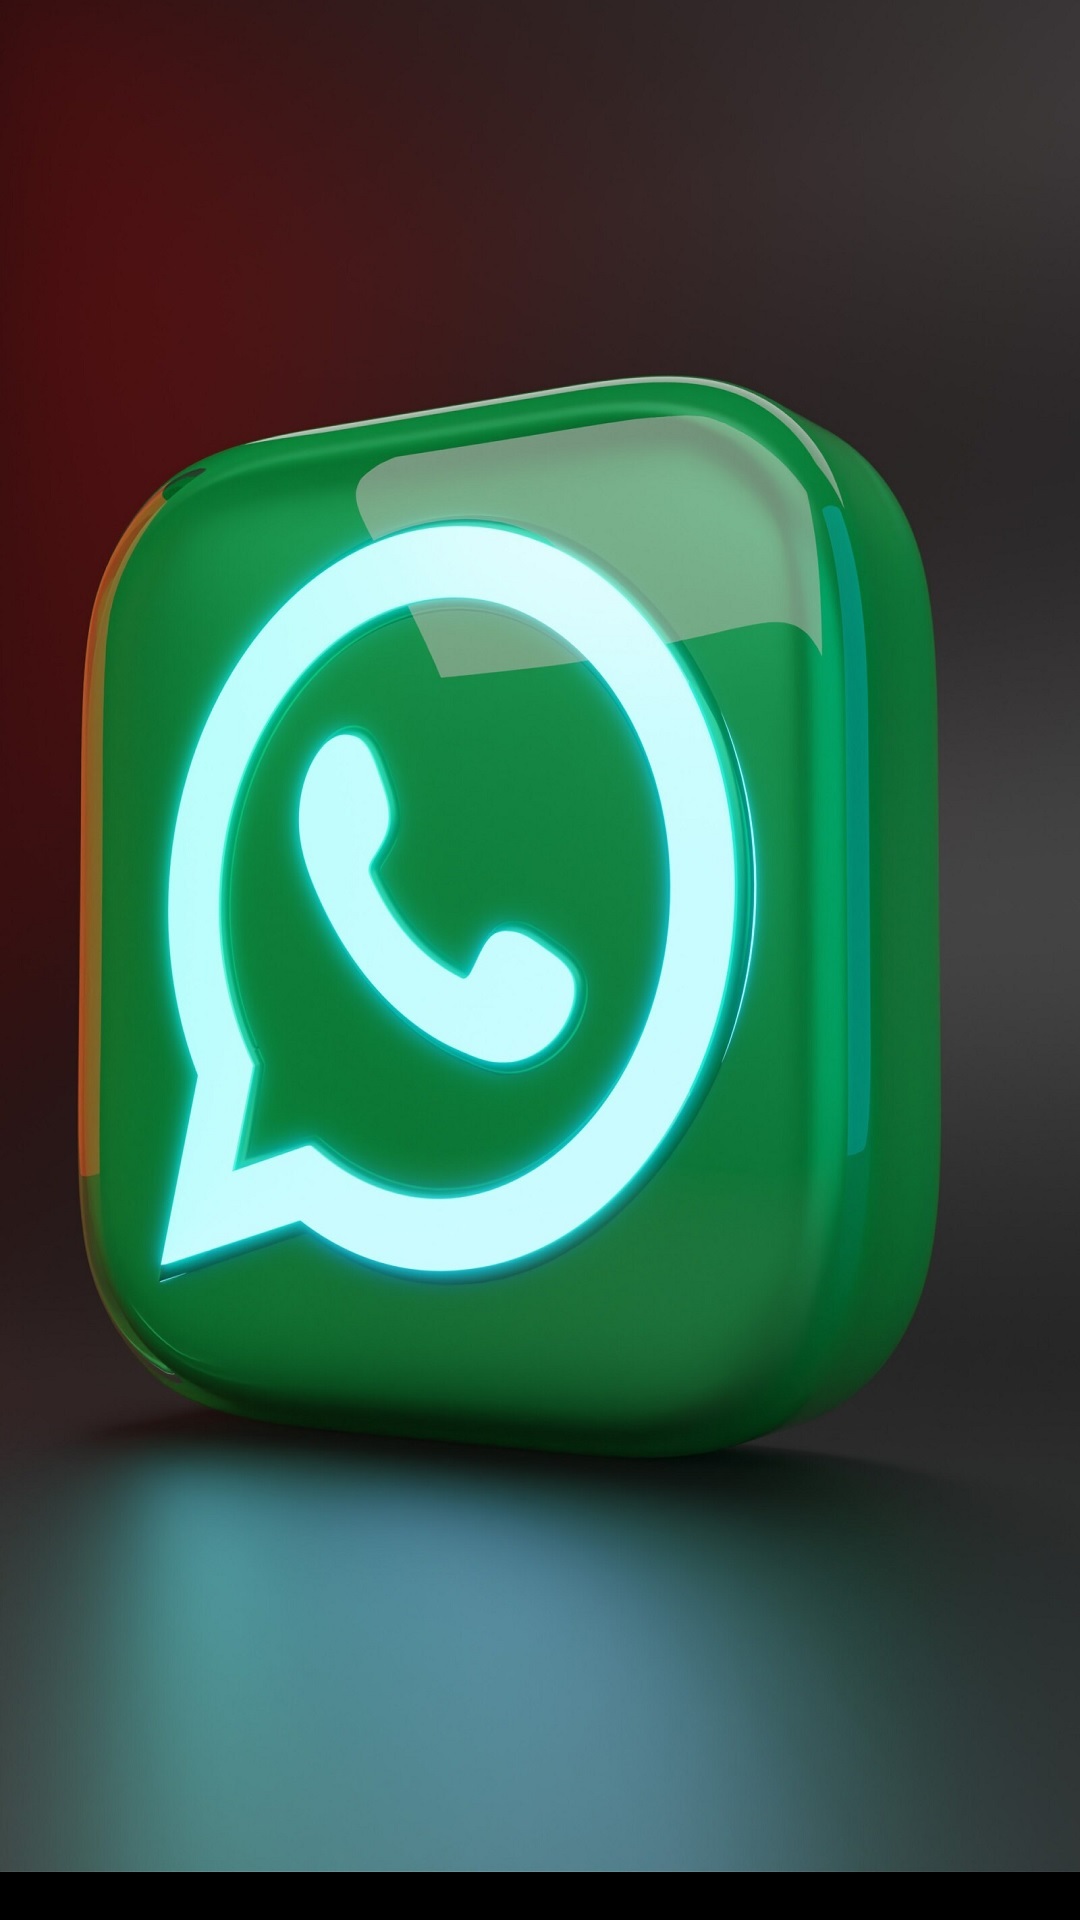 WhatsApp Update: 5 new features added to the platfrom
